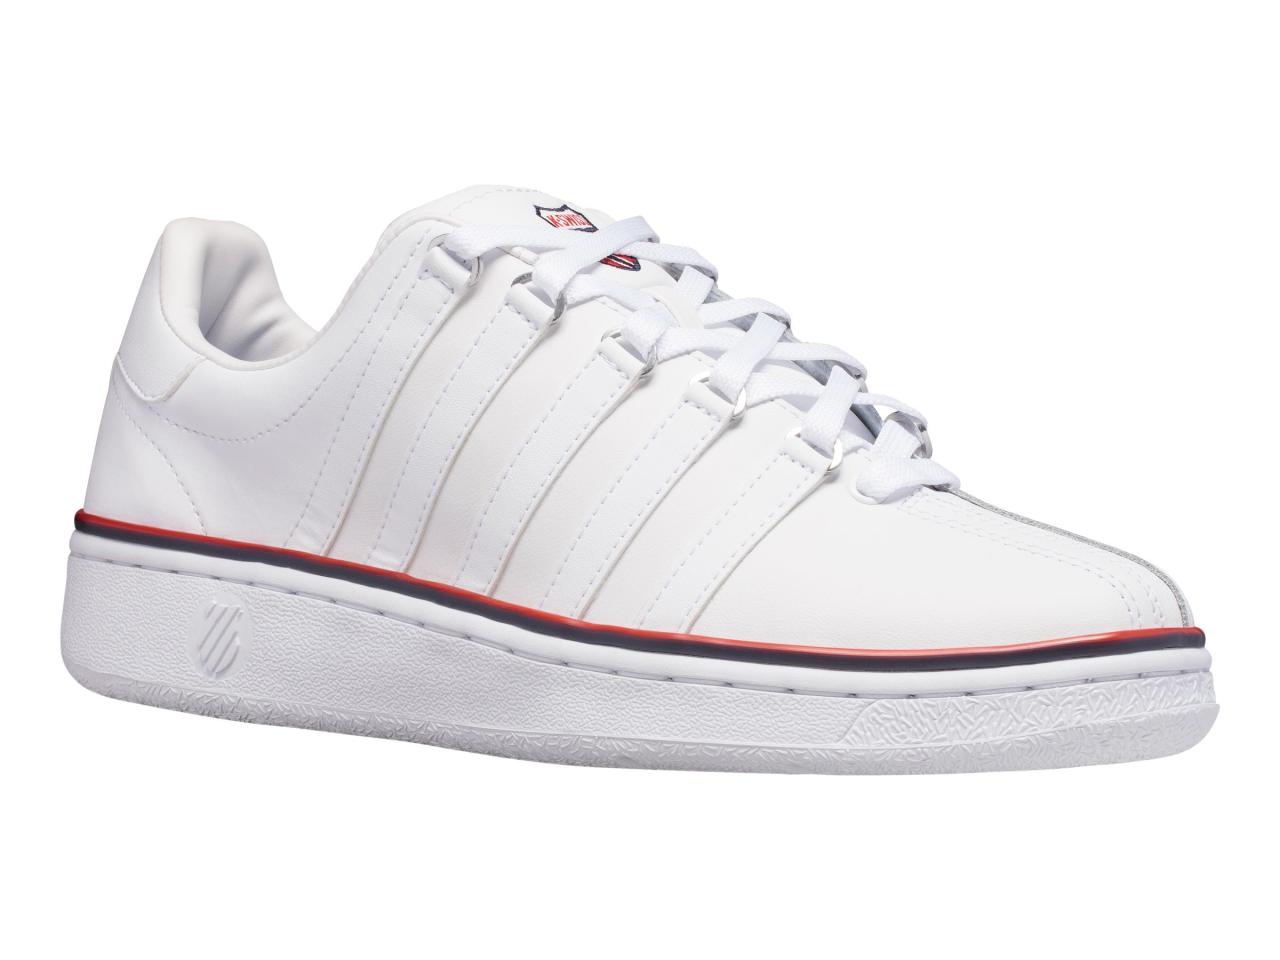 Introducing The Vintage- Inspired K-Swiss Classic Vn Rand • Kicksonfire.Com